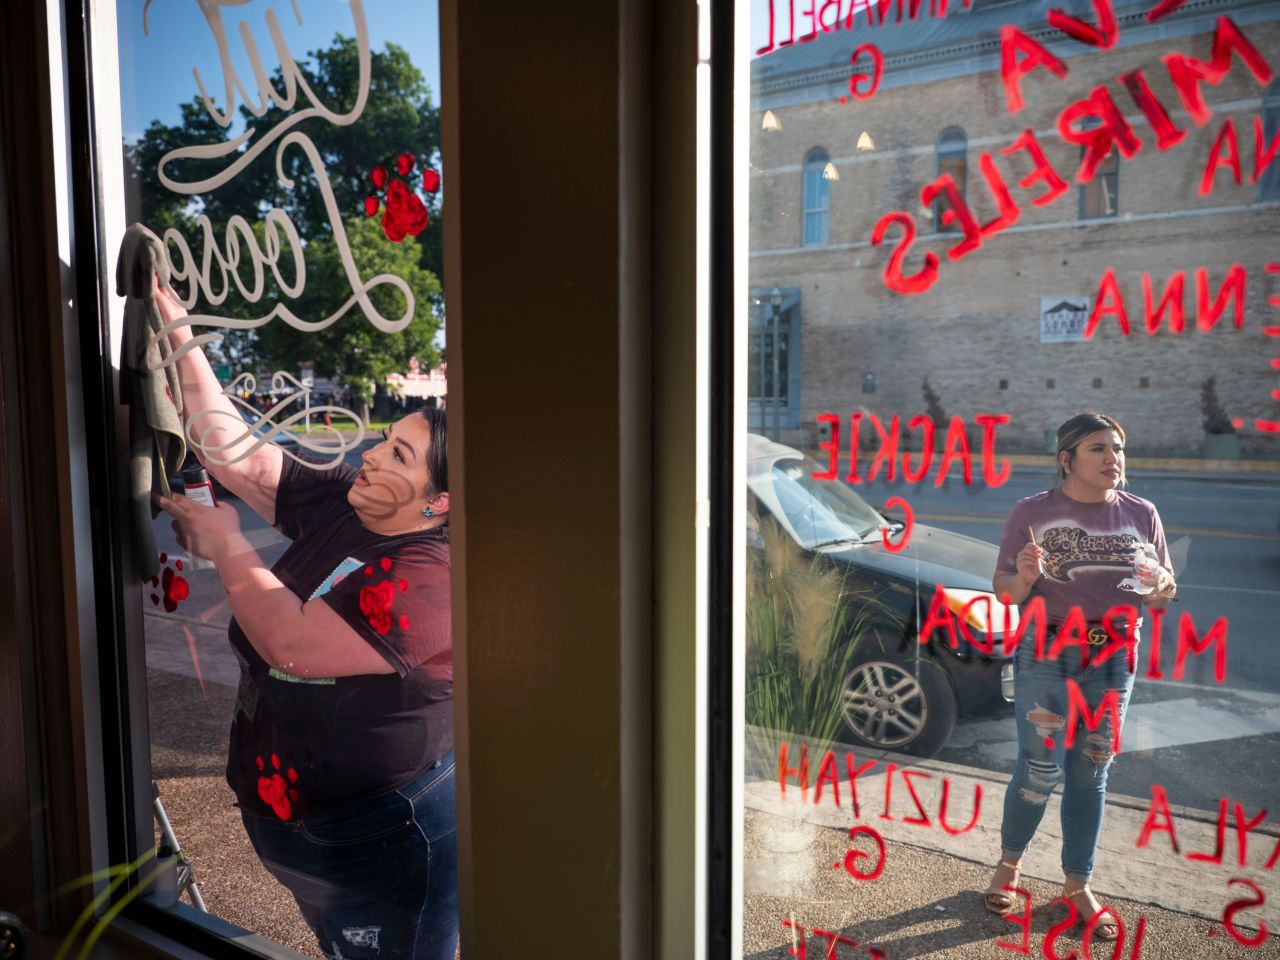 Vanessa Palacios, left, and Melissa García write the names of shooting victims on their storefront in Uvalde, Texas, on Friday, May 27. It was three days after a <a href="http://www.cnn.com/2022/05/24/us/gallery/uvalde-texas-school-shooting-photos/index.html" target="_blank">mass shooting at an Uvalde elementary school</a> left 19 students and two teachers dead.